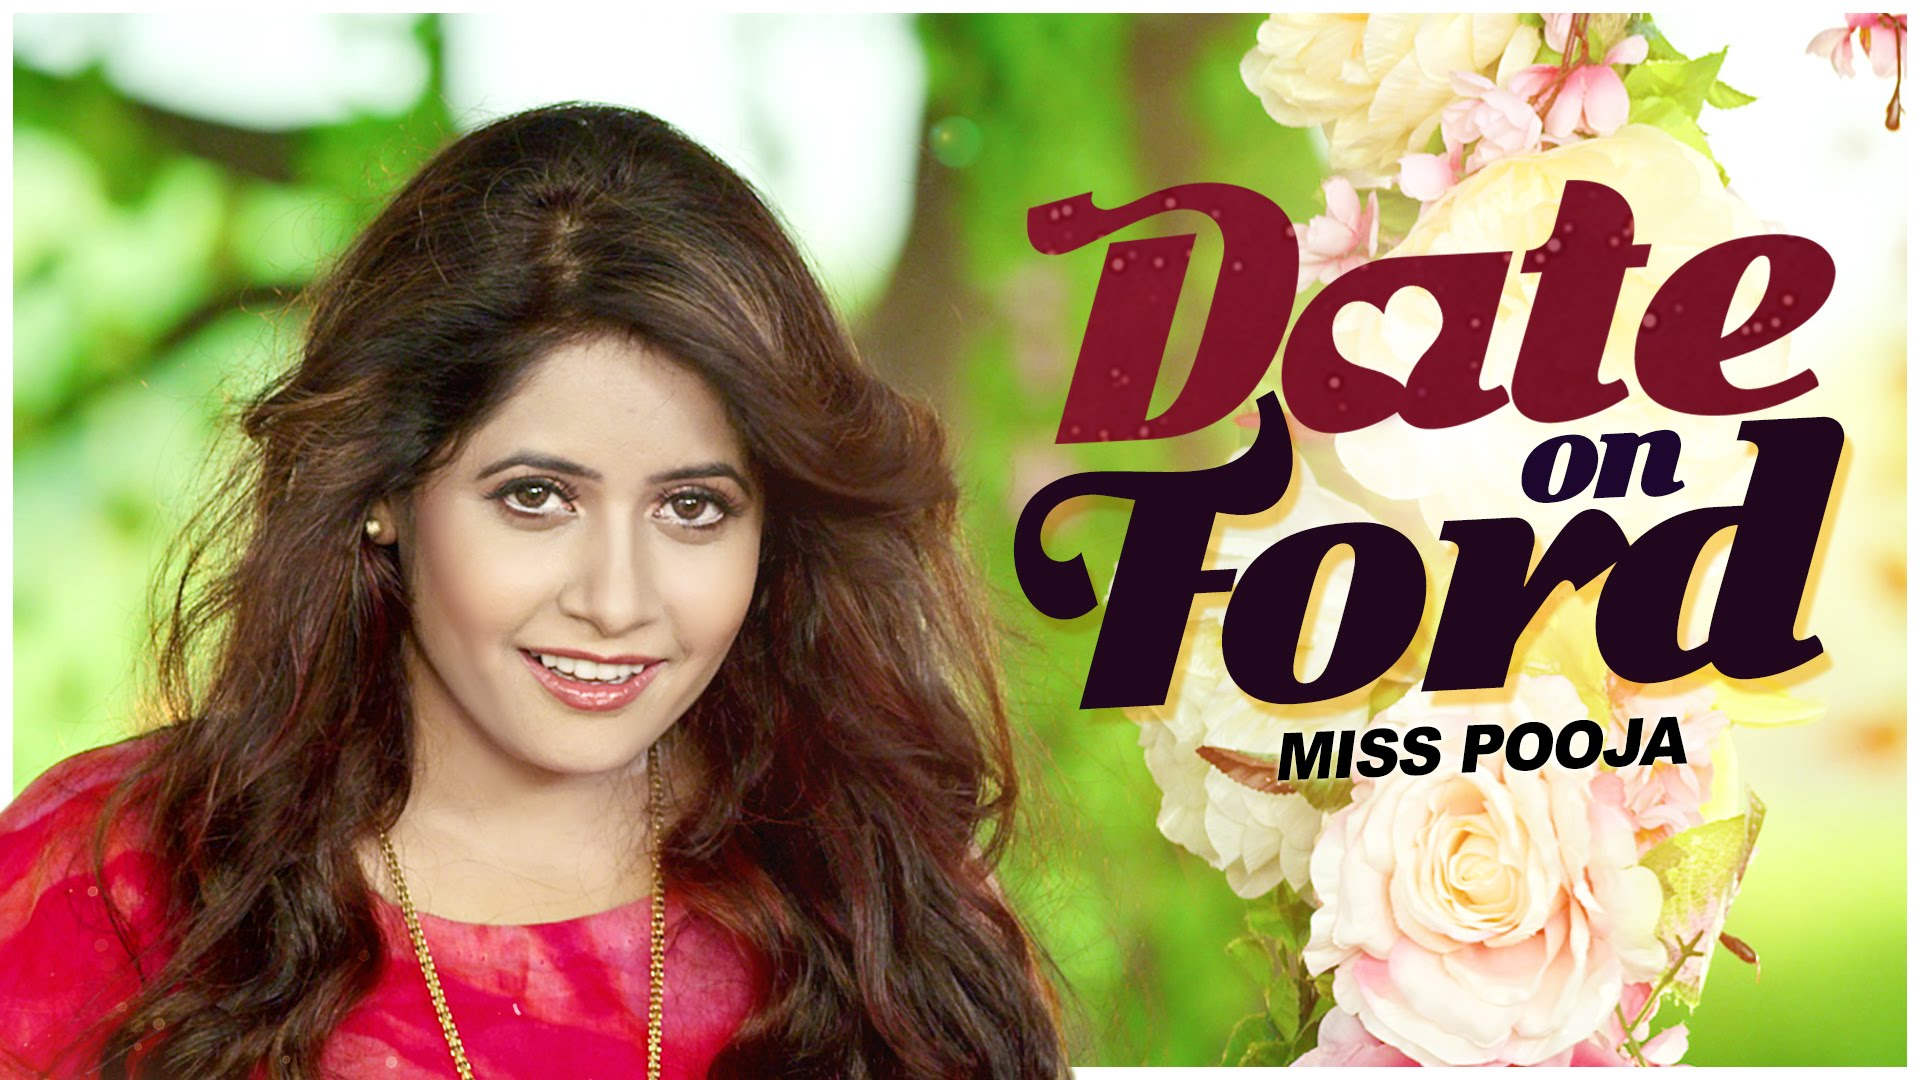 Miss Pooja New Song Date On Ford